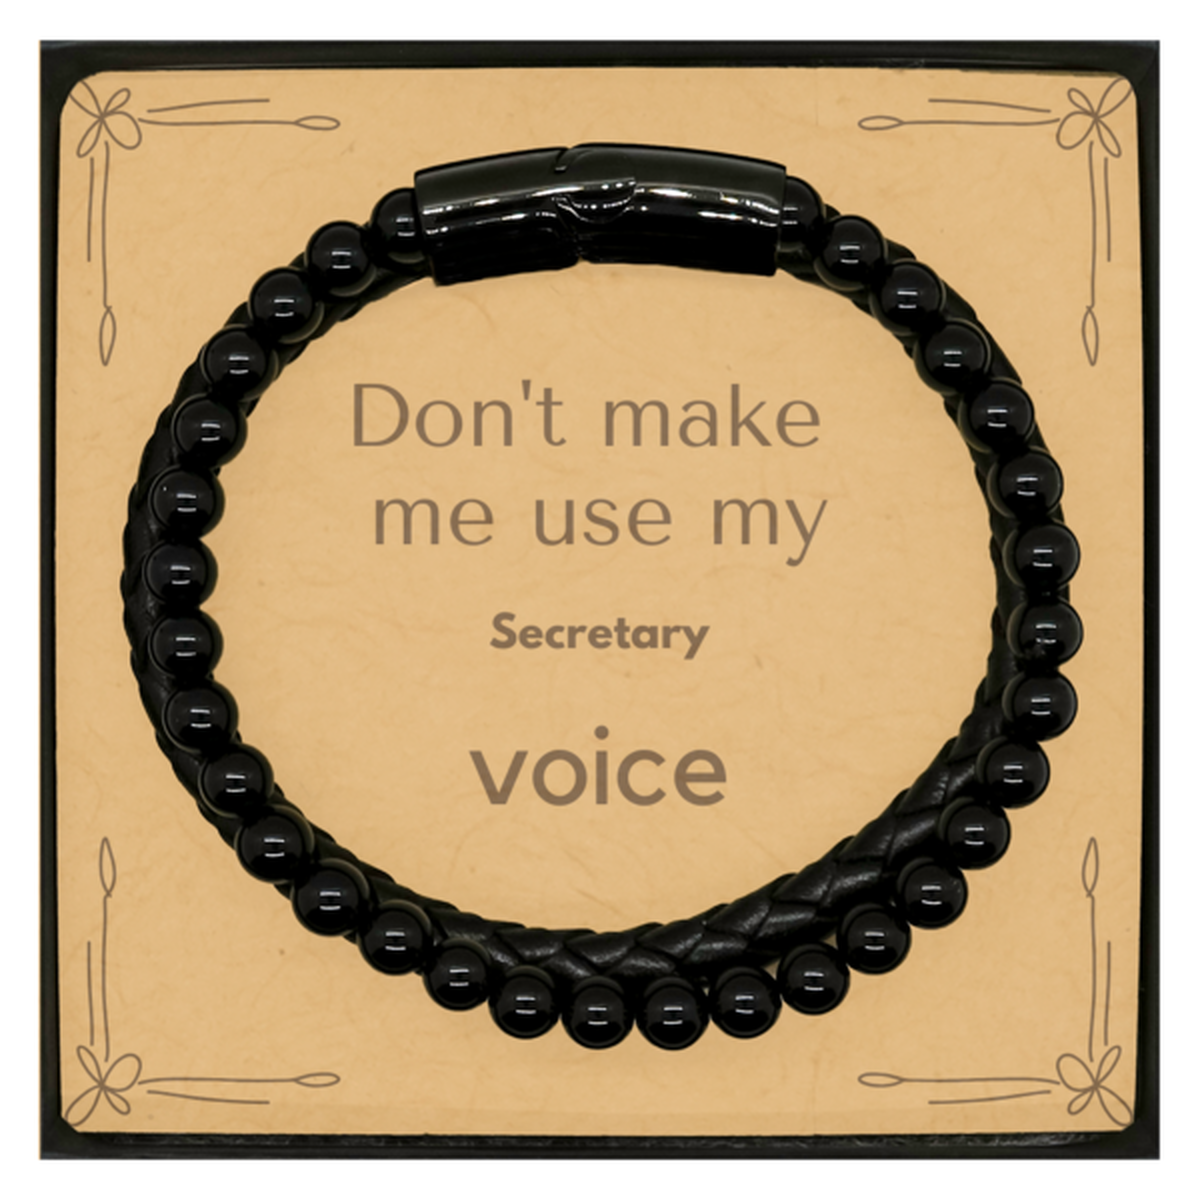 Don't make me use my Secretary voice, Sarcasm Secretary Card Gifts, Christmas Secretary Stone Leather Bracelets Birthday Unique Gifts For Secretary Coworkers, Men, Women, Colleague, Friends